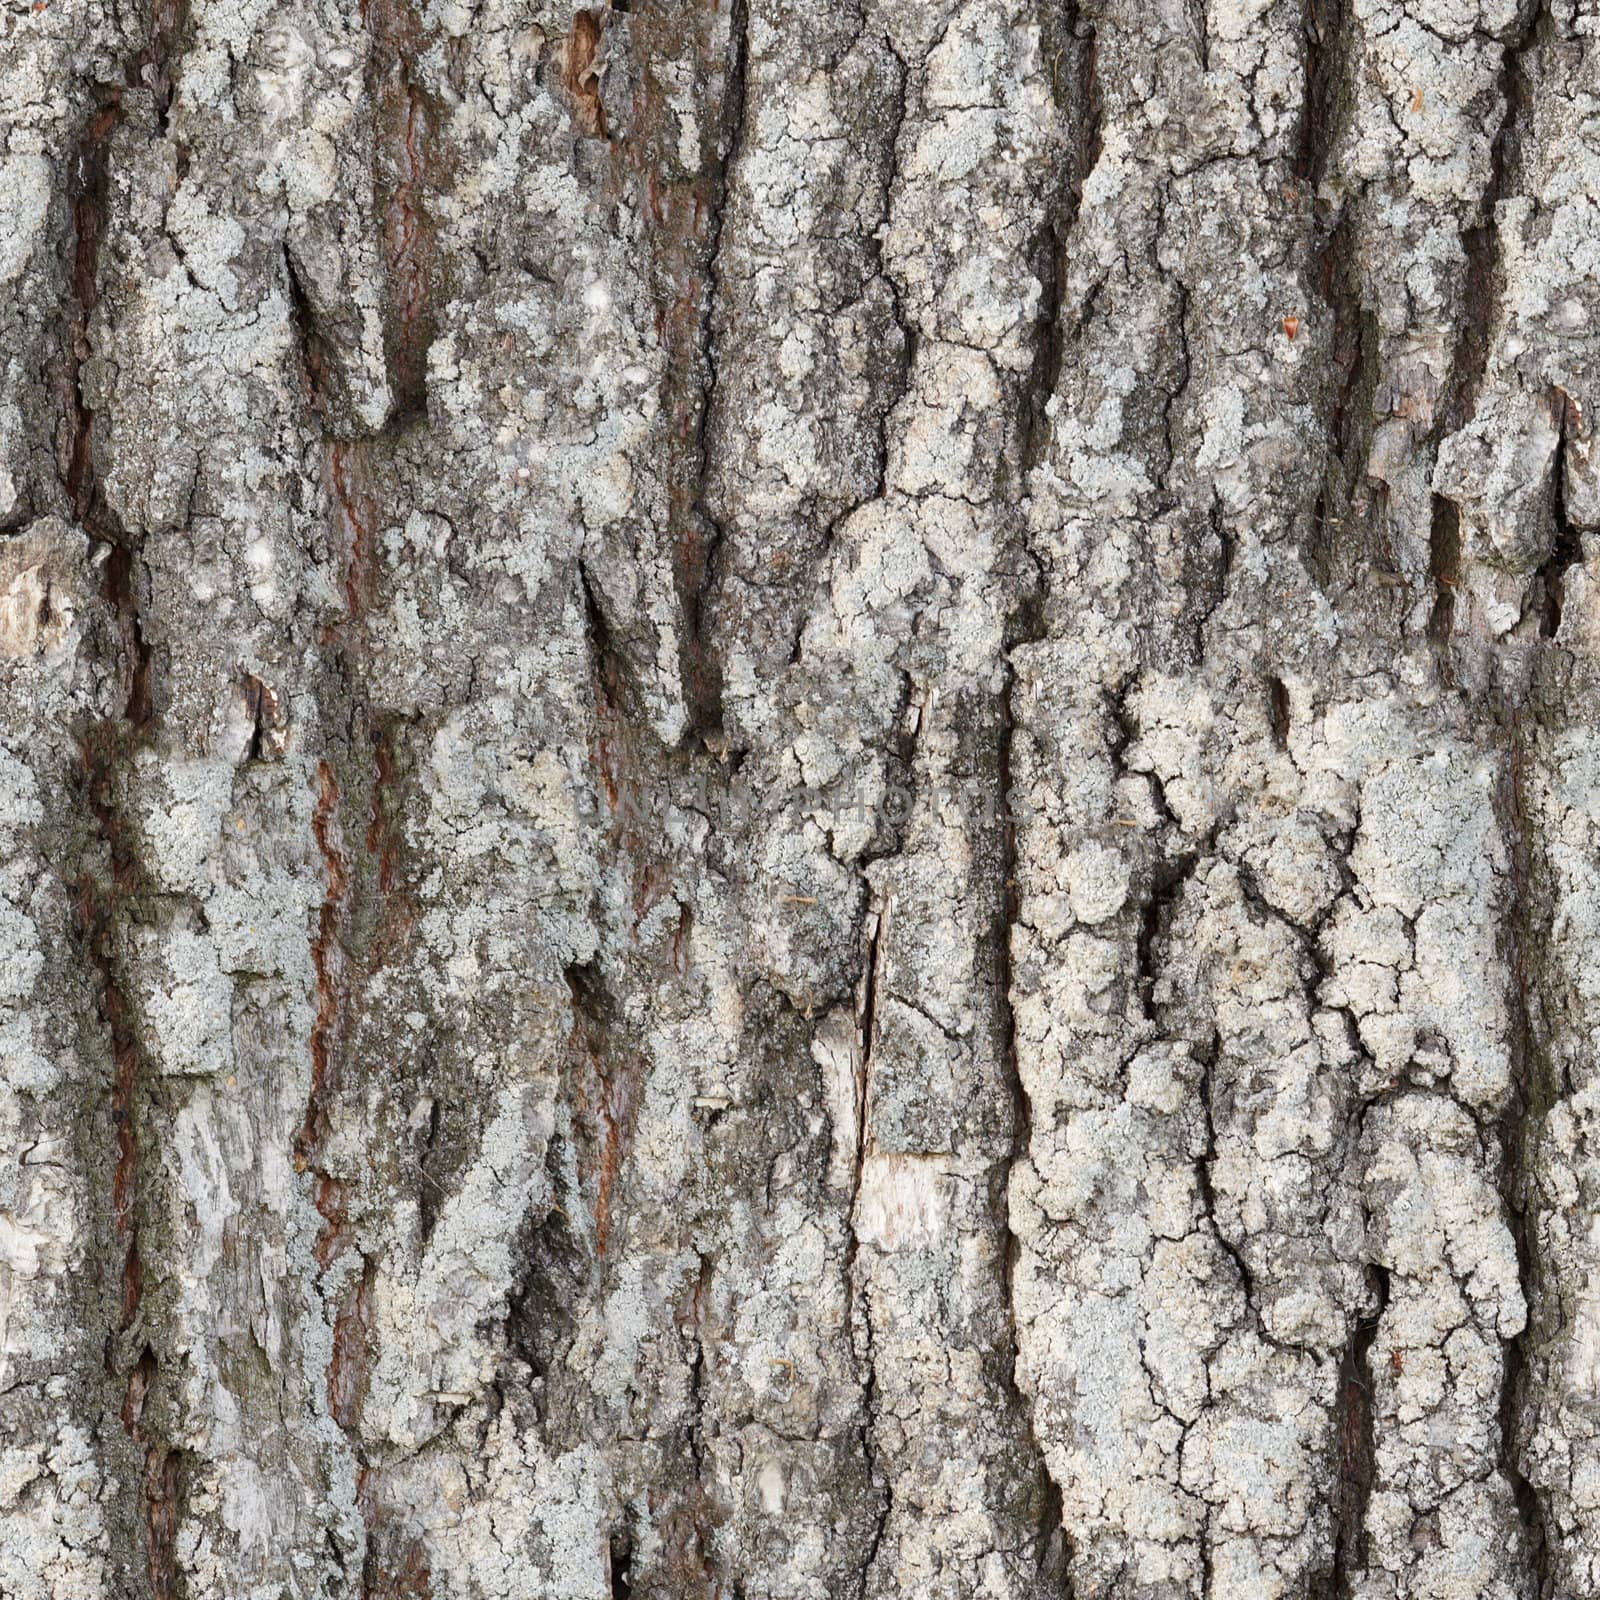 The seamless texture surface of the bark